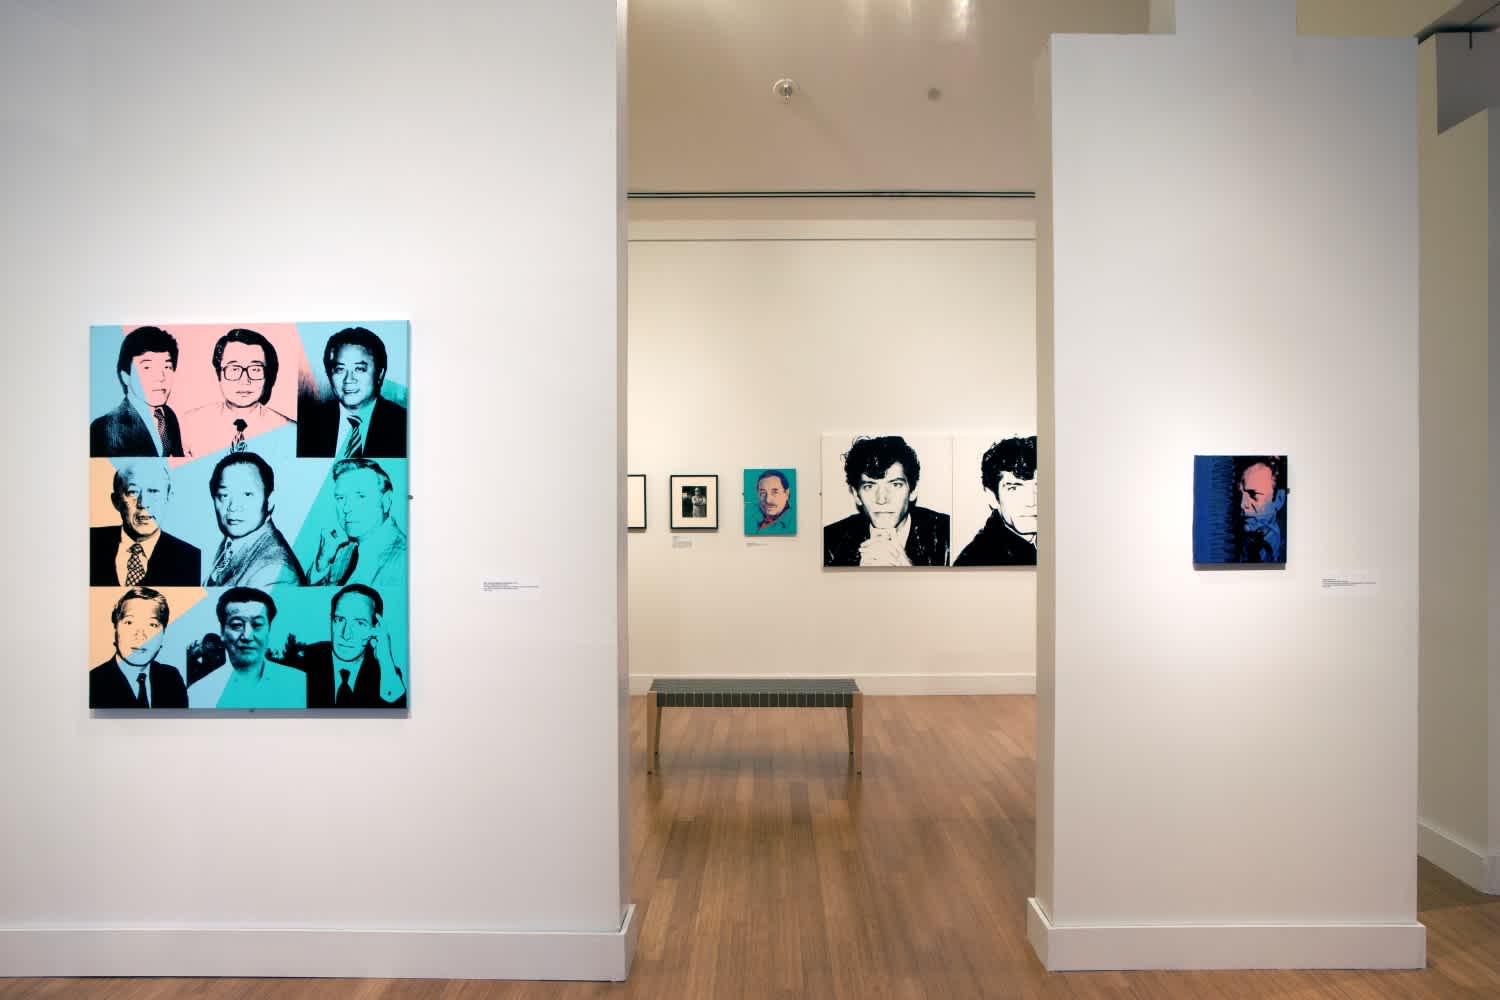 Installation image of the 2012 art exhibition Andy Warhol: Portraits at the Virginia Museum of Contemporary Art in Virginia Beach, Virginia. 